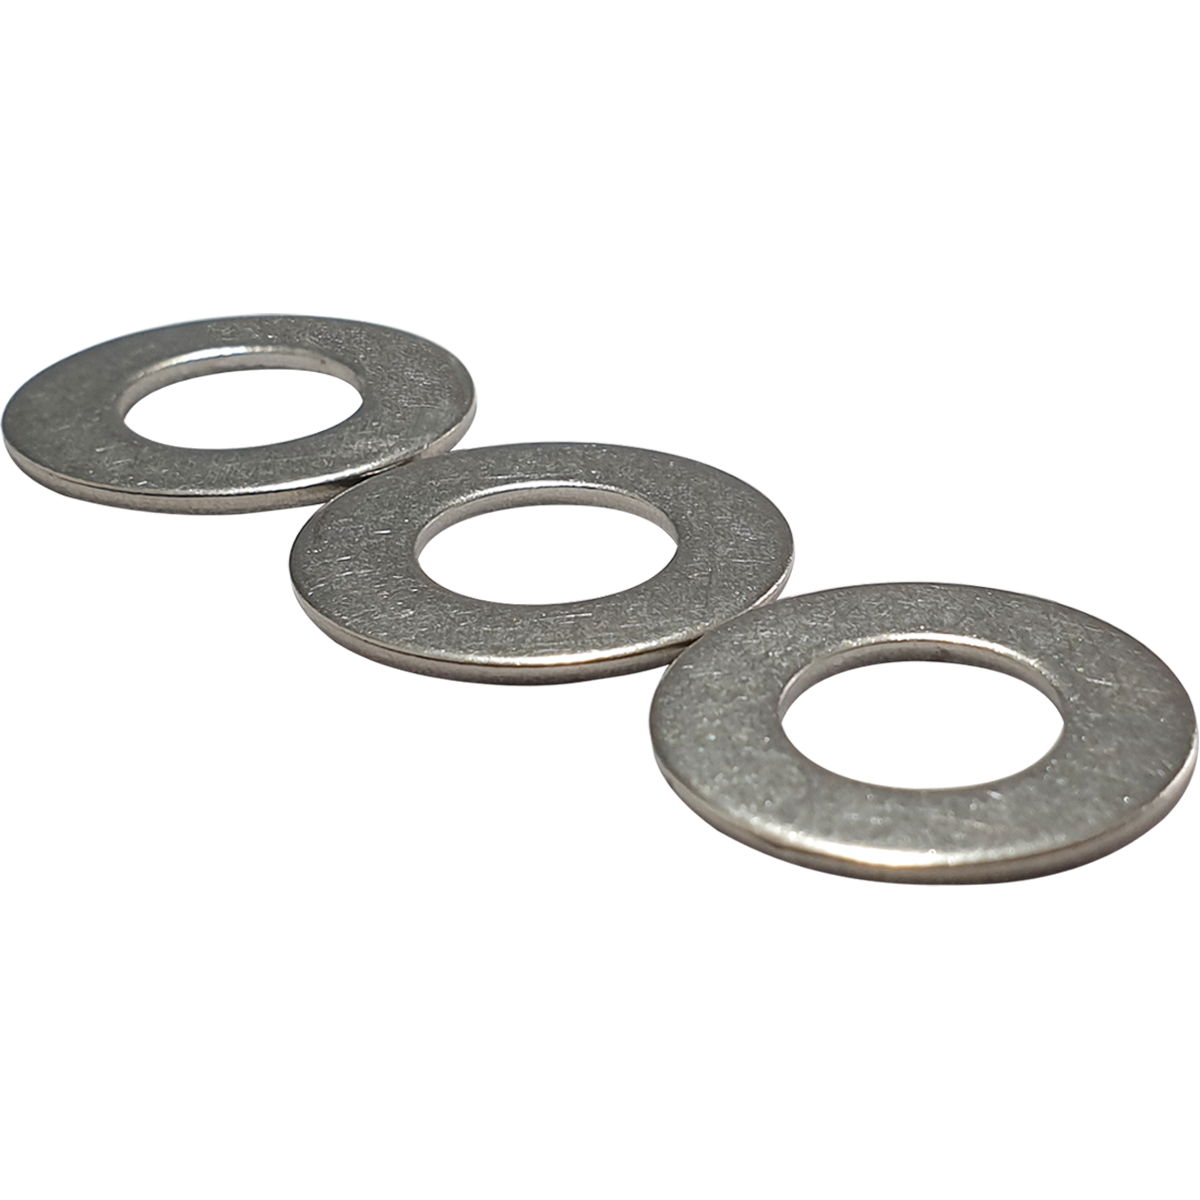 A2 stainless steel Imperial Washers are available in various diameters